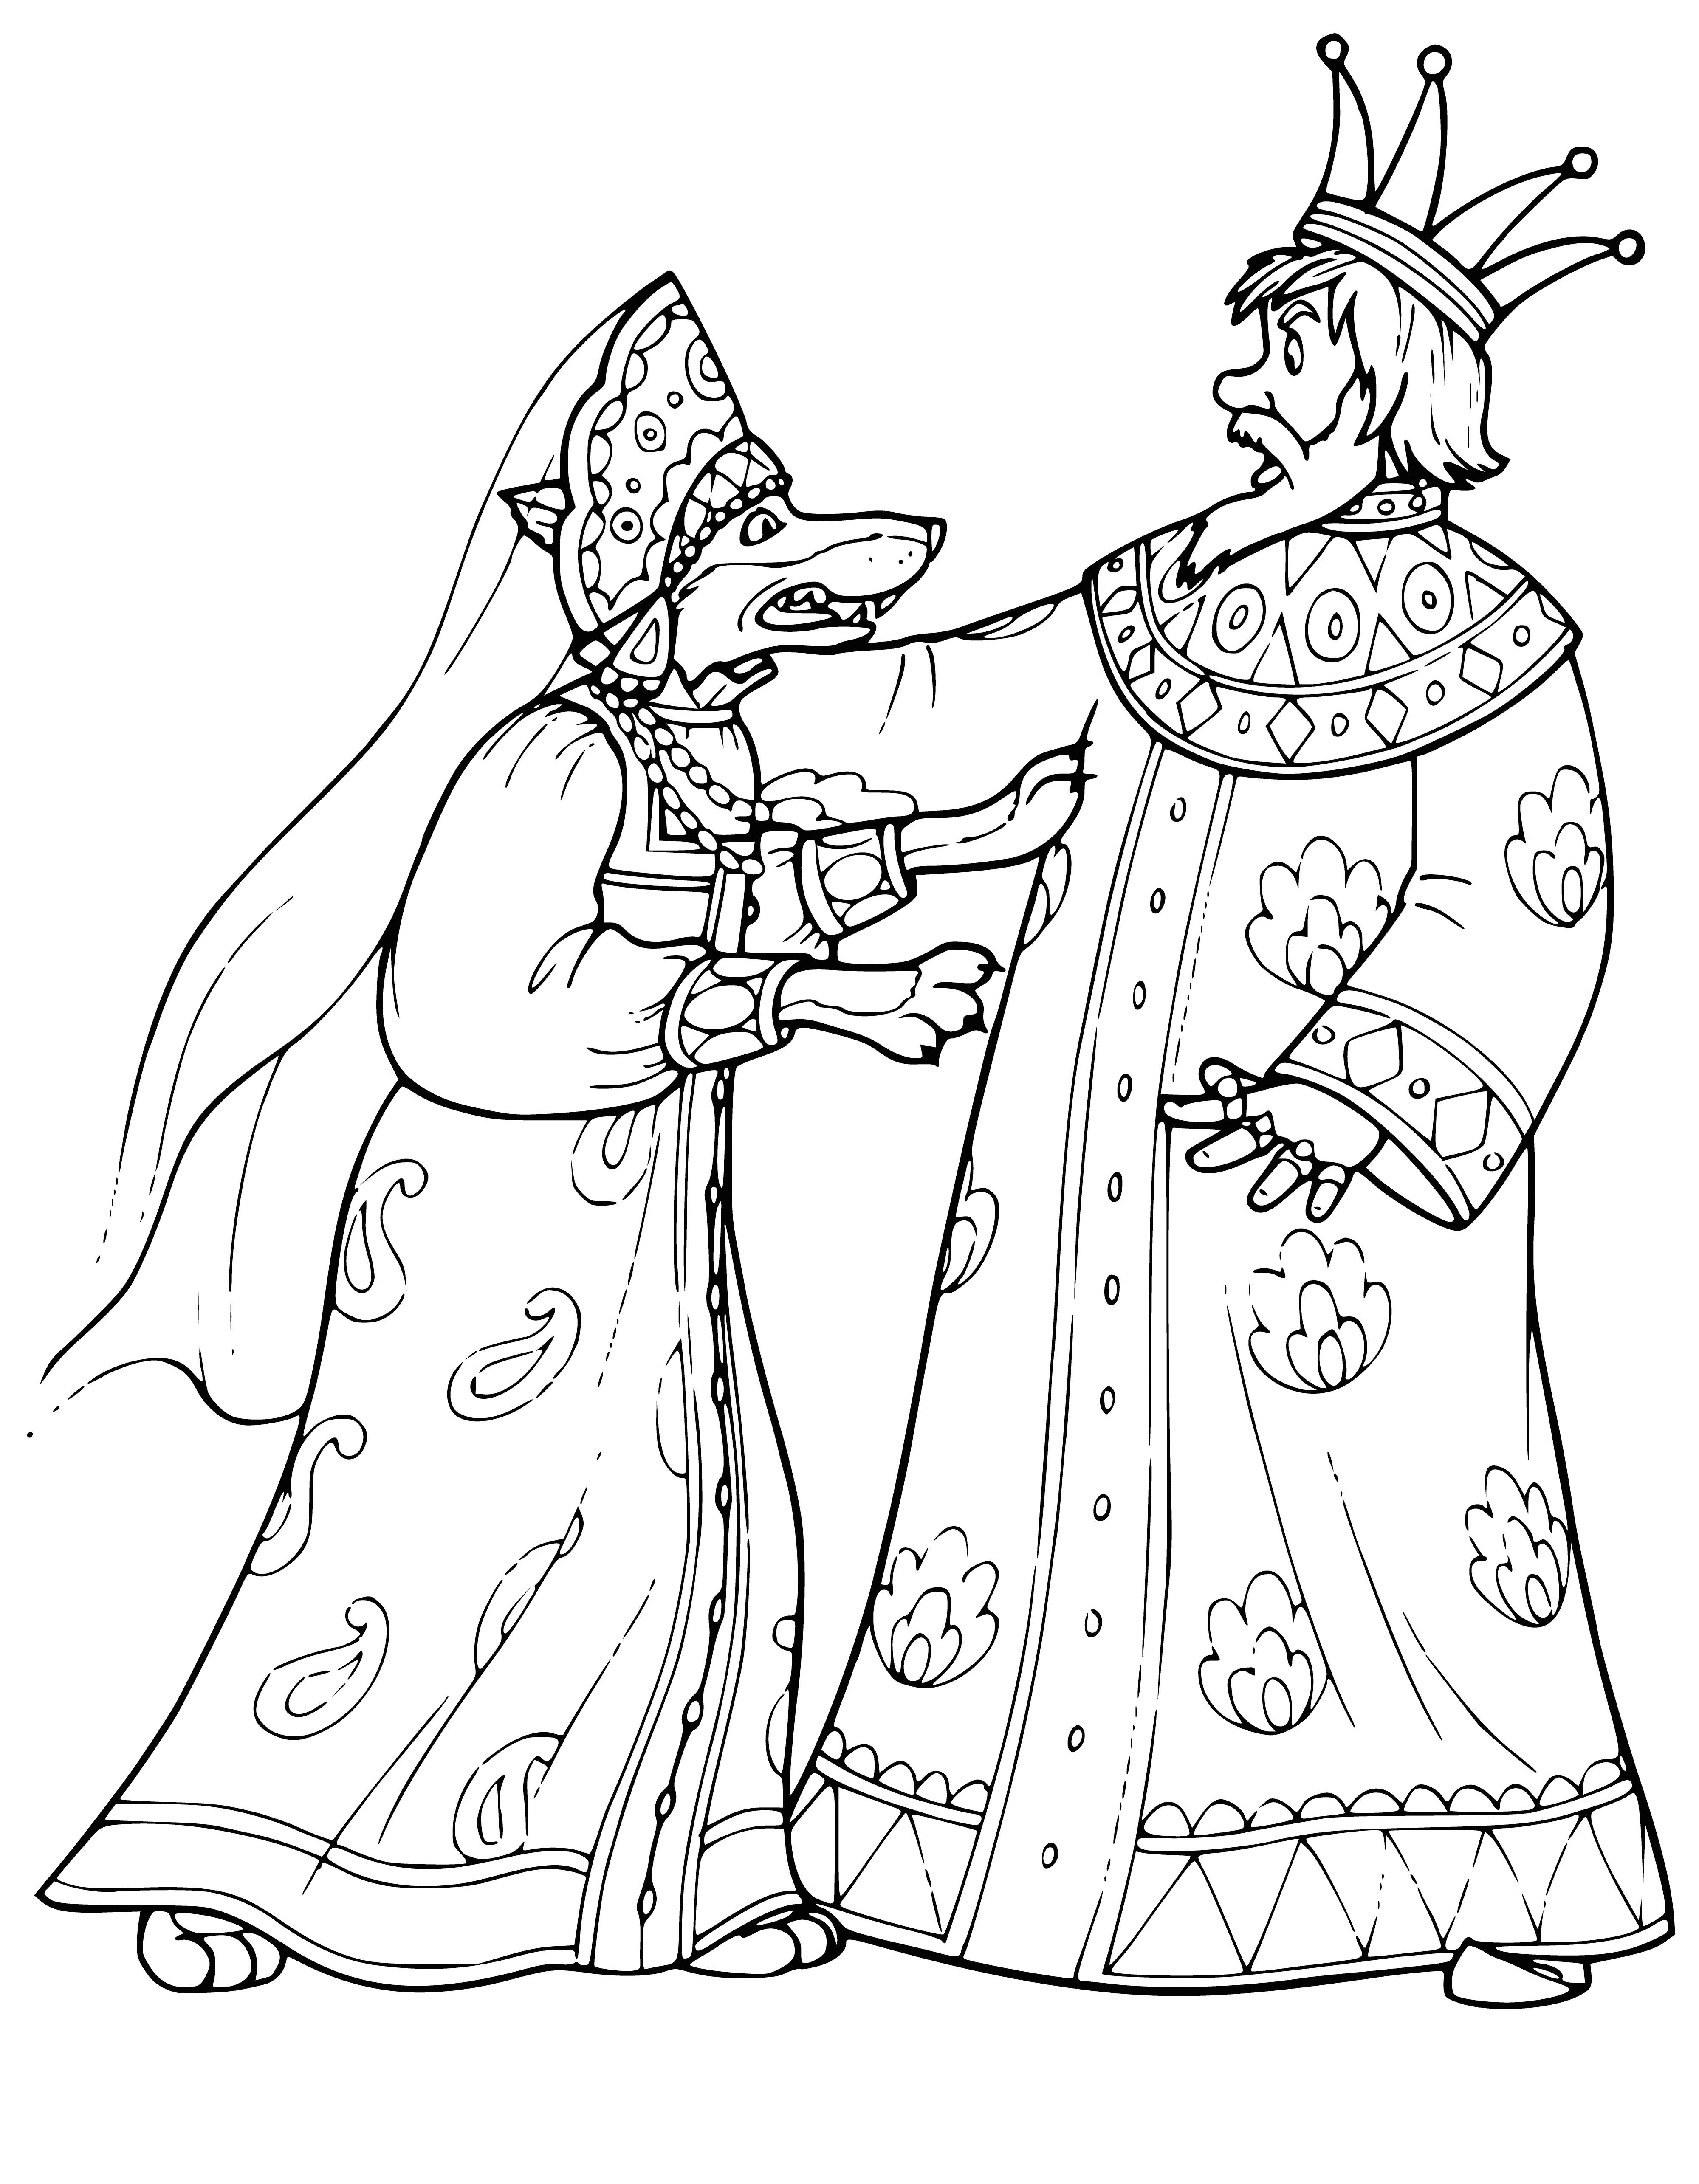 coloring page: King and wolf sitting in a room, king looking at wolf wearing a crown; wolf looking at king with a sword.